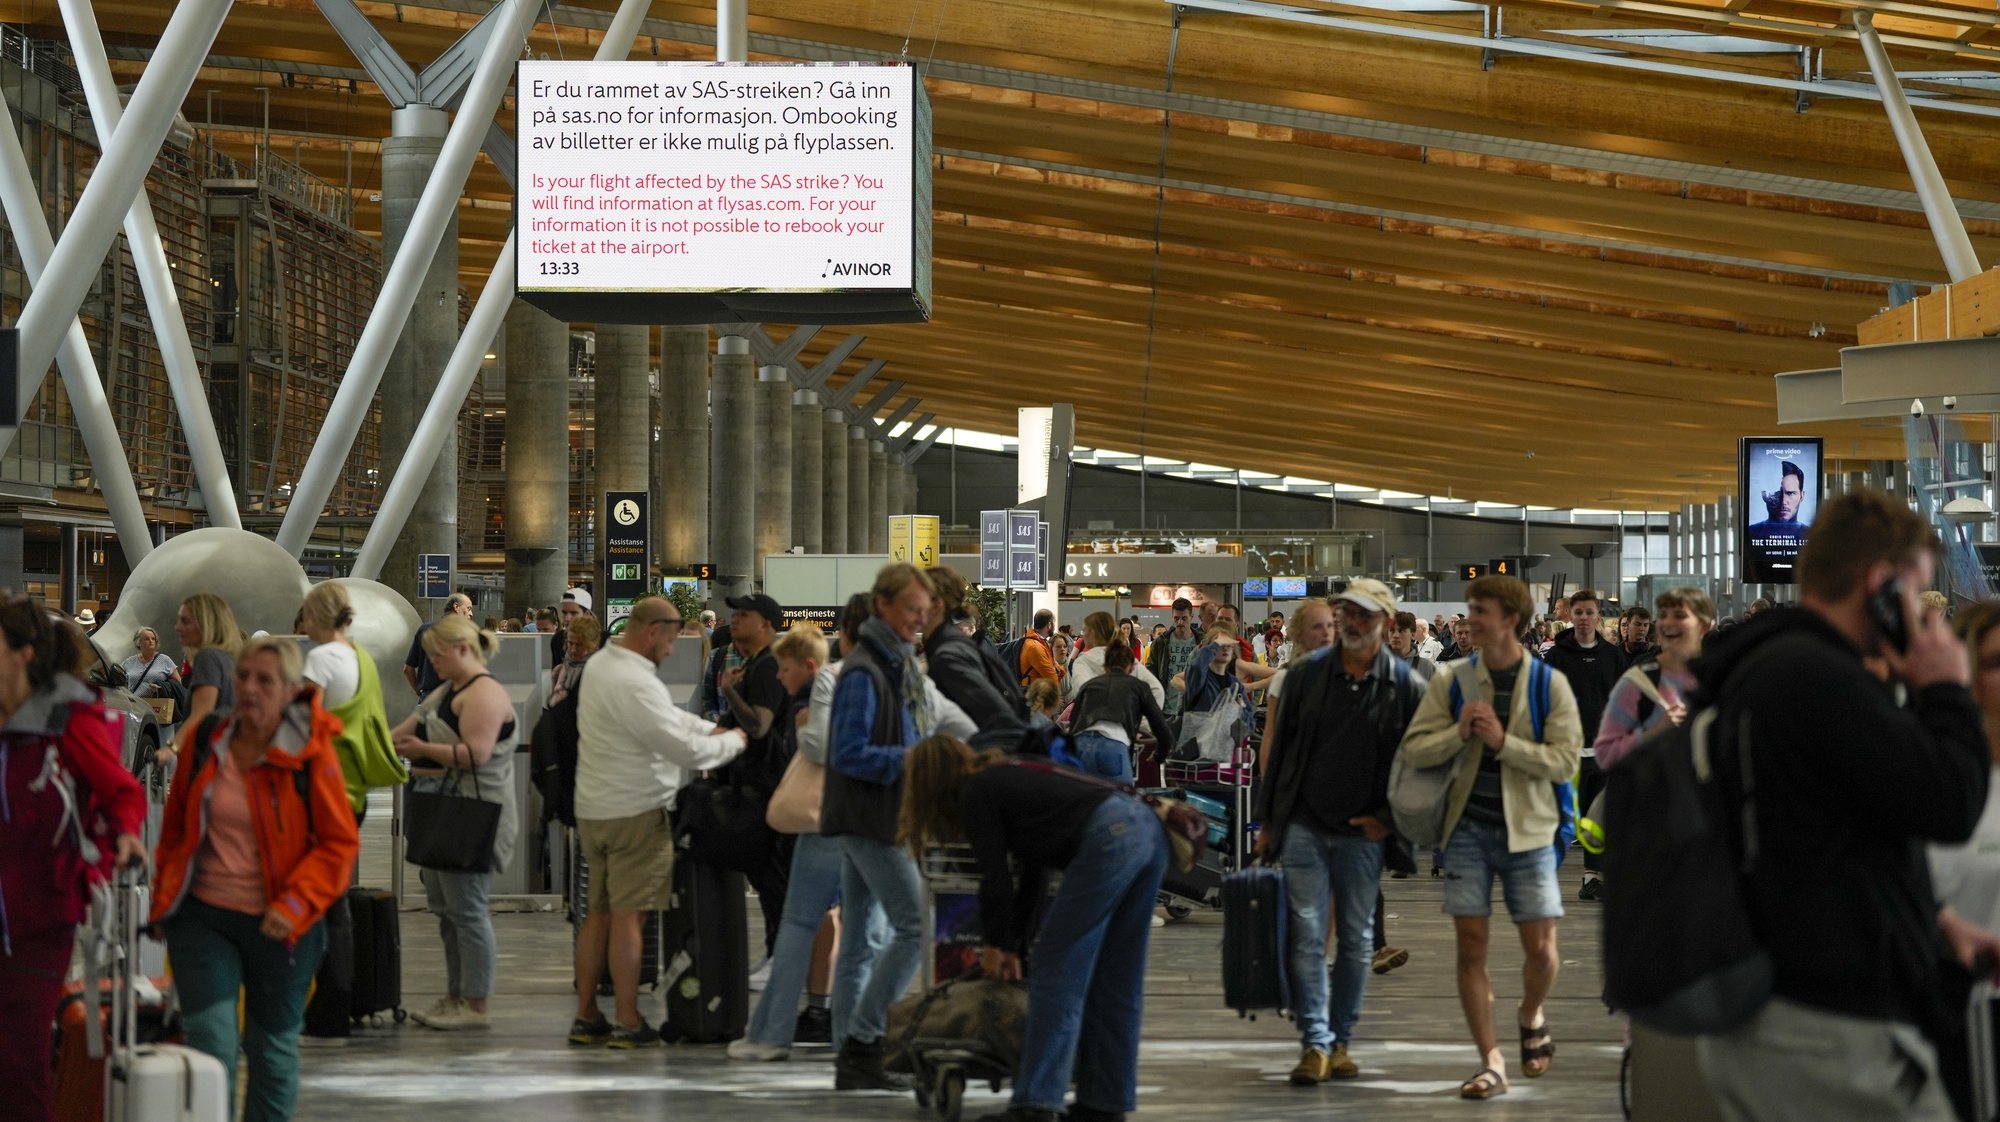 epa10051380 The departure hall at Oslo Gardermoen Airport in Gardermoen, Norway, 04 July 2022. Some 900 Scandinavian Airlines (SAS) pilots in Sweden, Denmark and Norway called for a strike on 04 July as the company and the pilots’ union failed to reach an agreement within the deadline. Pilots, already dissatisfied with working conditions, claim the company refuses to reinstate staff fired during the pandemic, and instead employs new pilots with cheaper agreements.  EPA/BEATE OMA DAHLE  NORWAY OUT